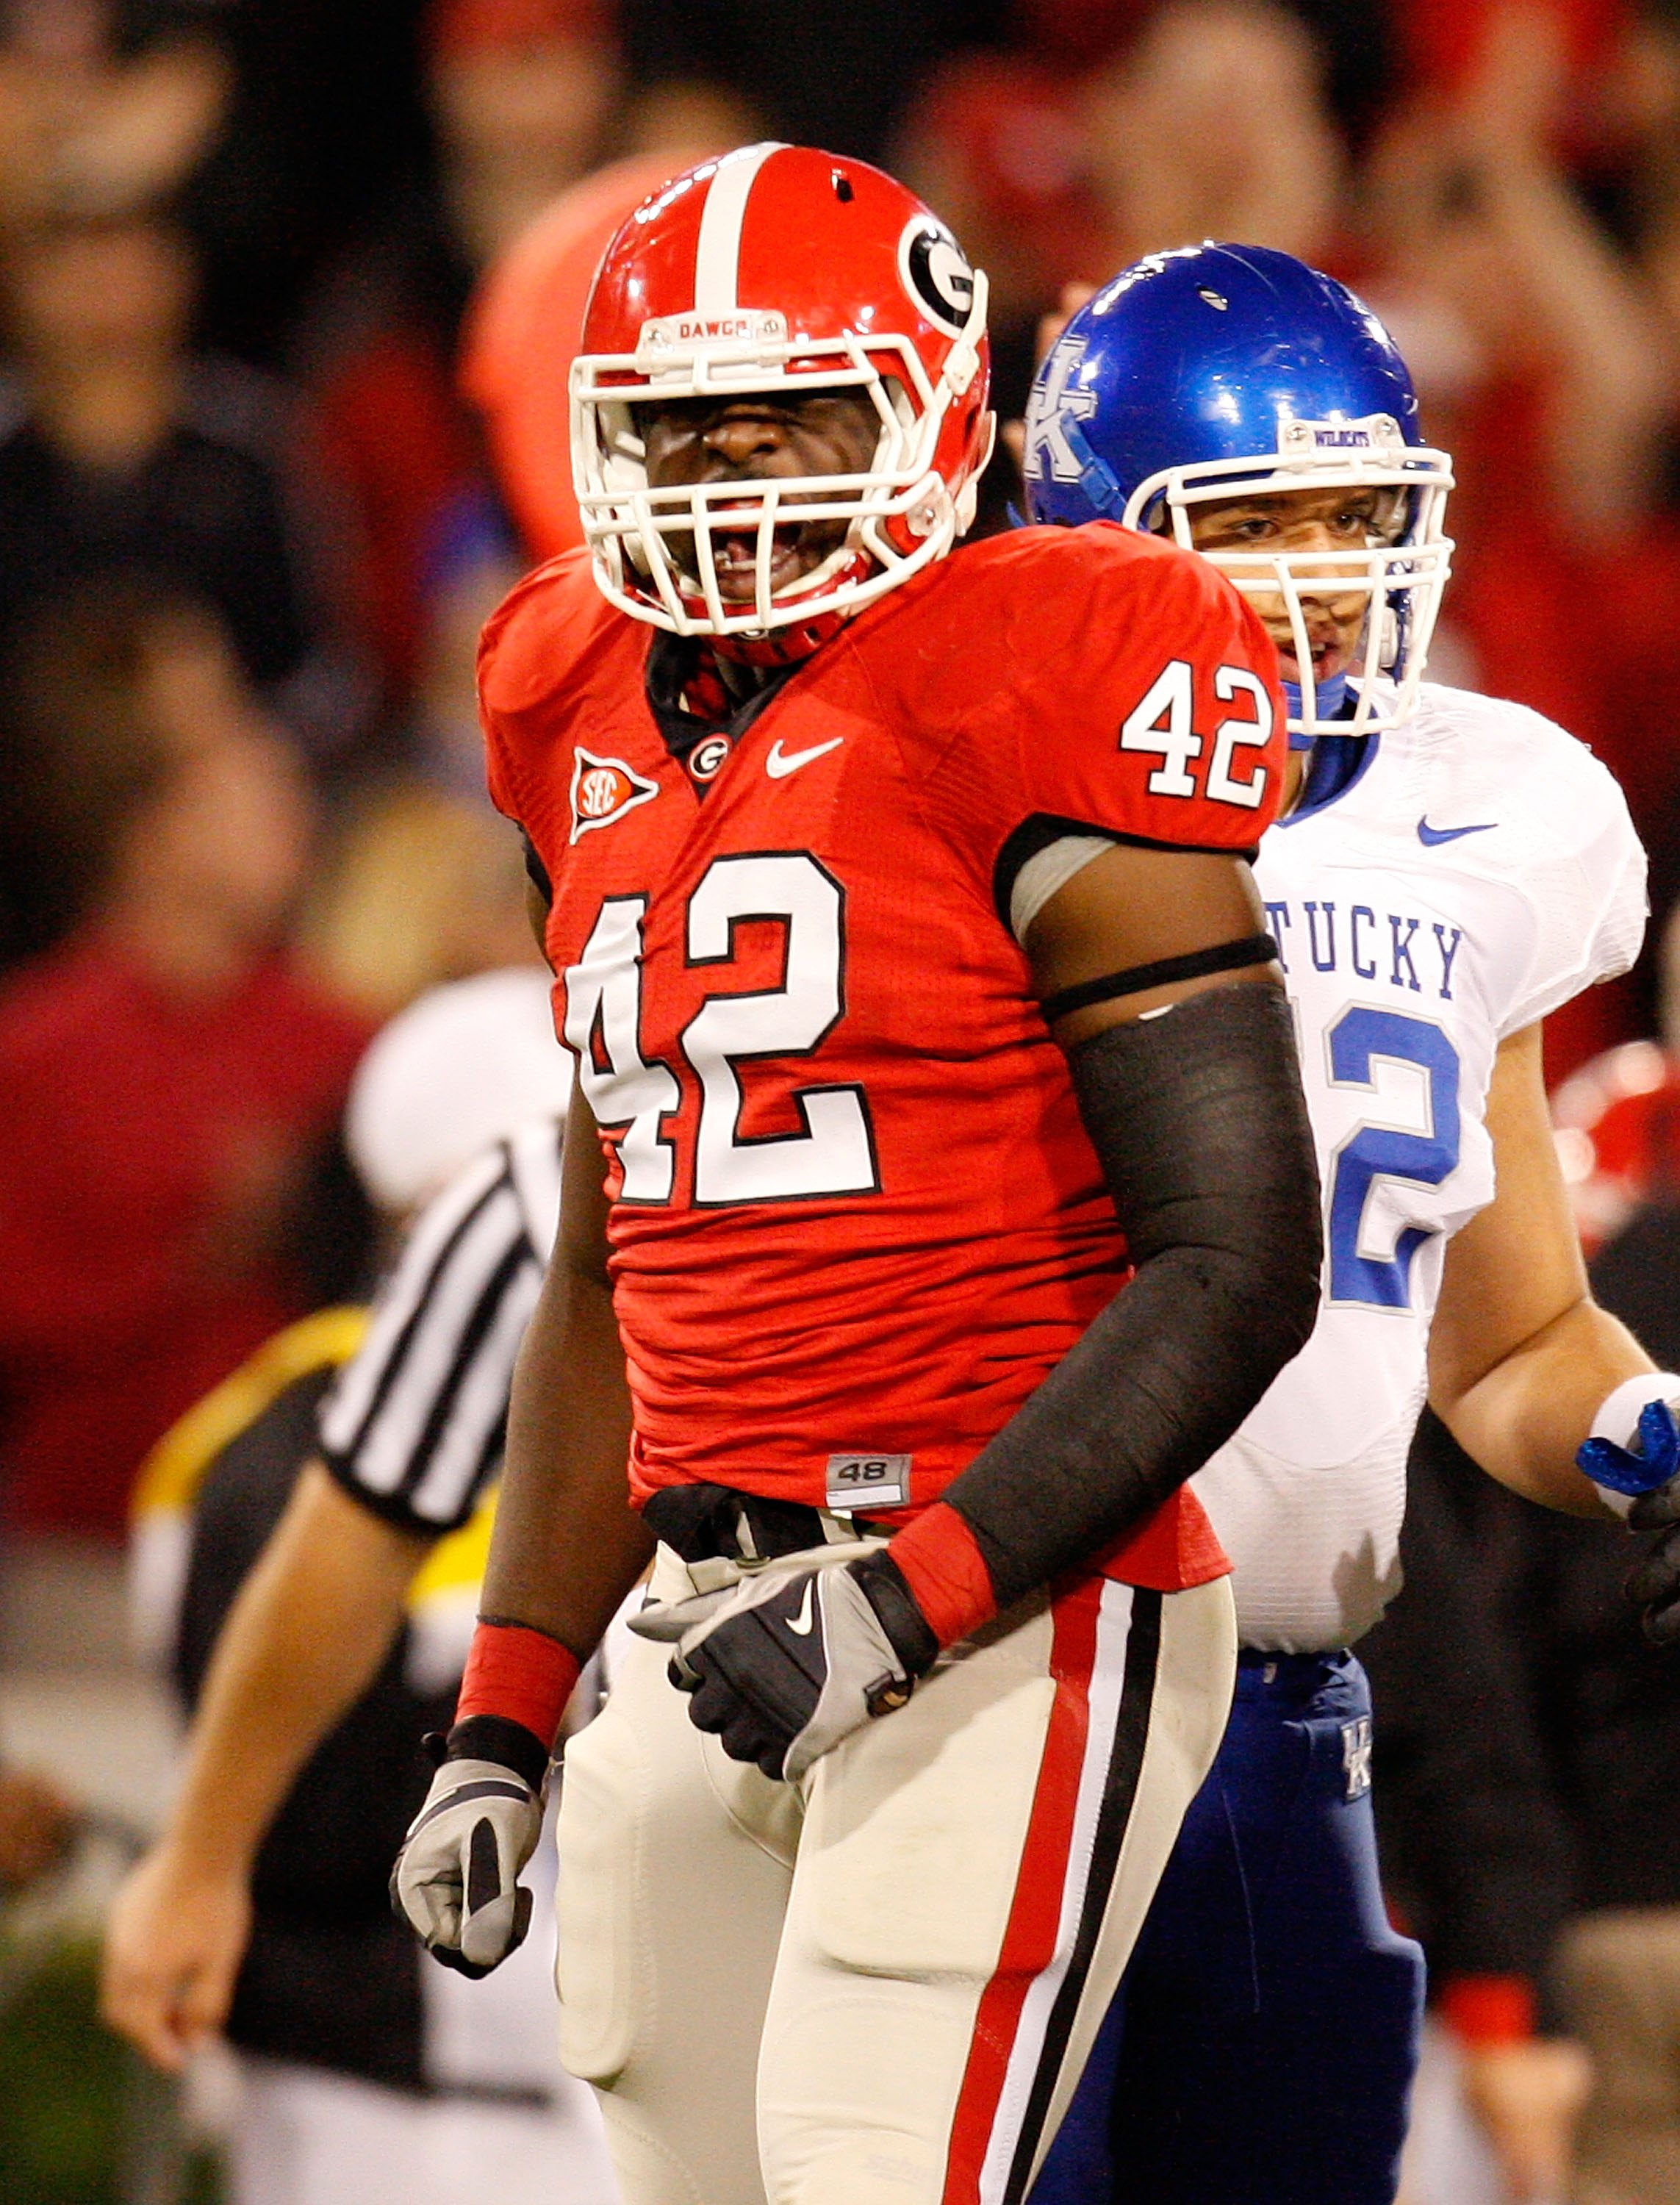 ATHENS, GA - NOVEMBER 21:  Justin Houston #42 of the Georgia Bulldogs against the Kentucky Wildcats at Sanford Stadium on November 21, 2009 in Athens, Georgia.  (Photo by Kevin C. Cox/Getty Images)